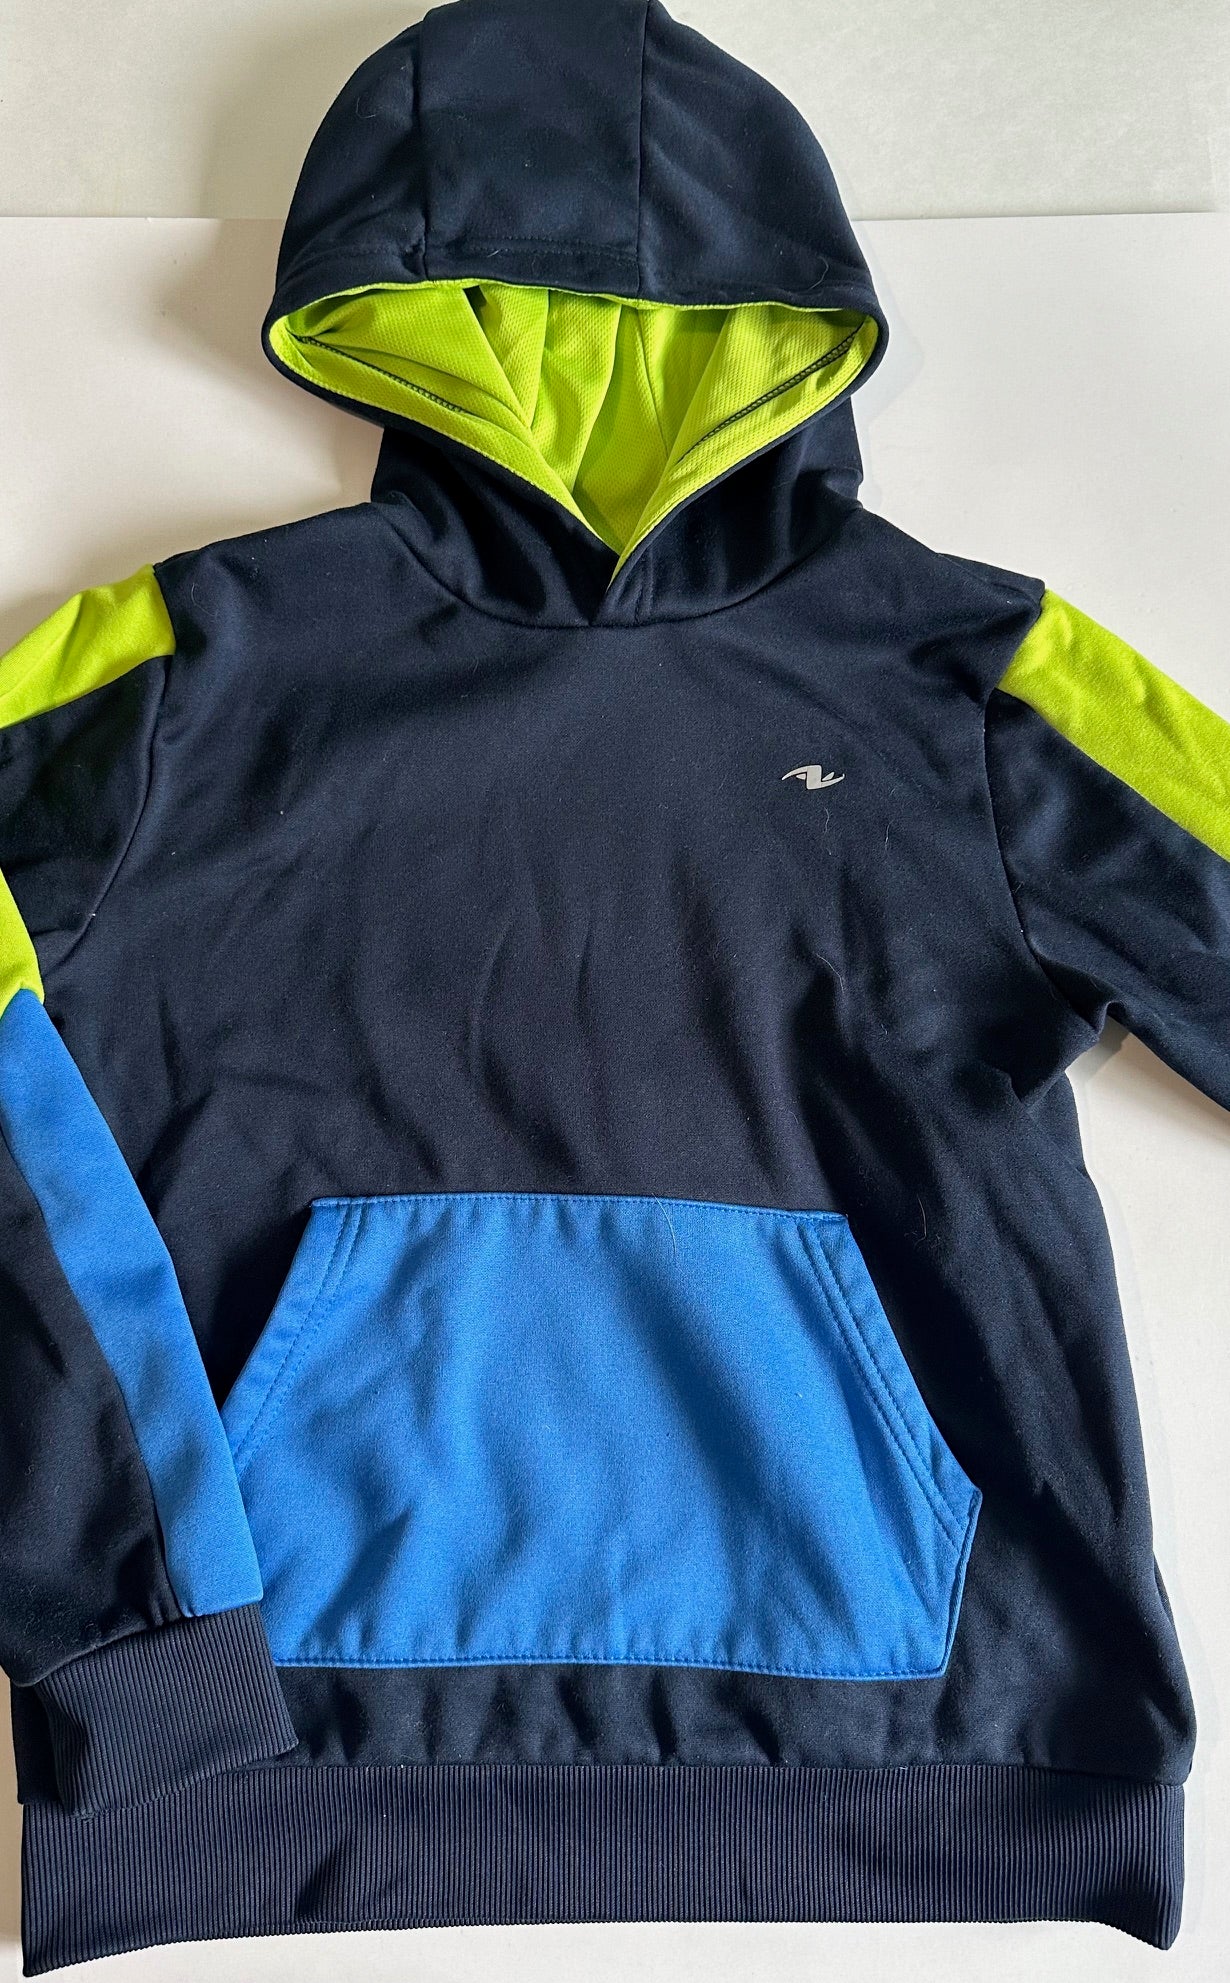 Athletic Works, Blue and Green Pullover Hoodie - Size Large (10-12)